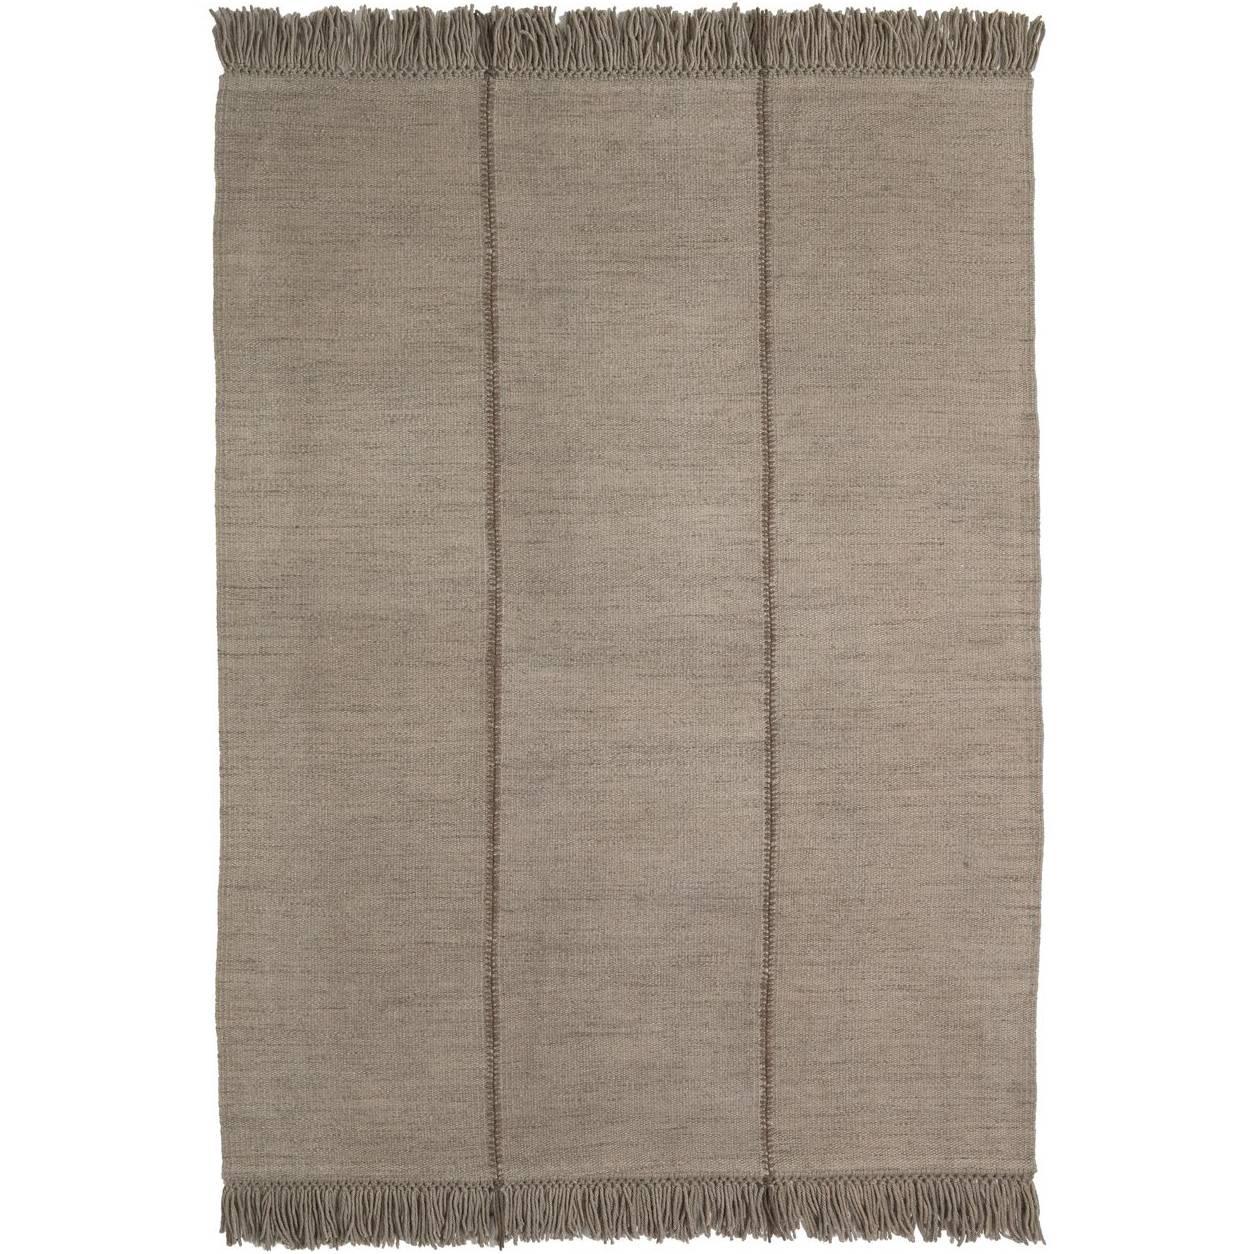 Mia Large Stone Hand-Loomed Wool Dhurrie Rug by Nani Marquina, Medium For Sale